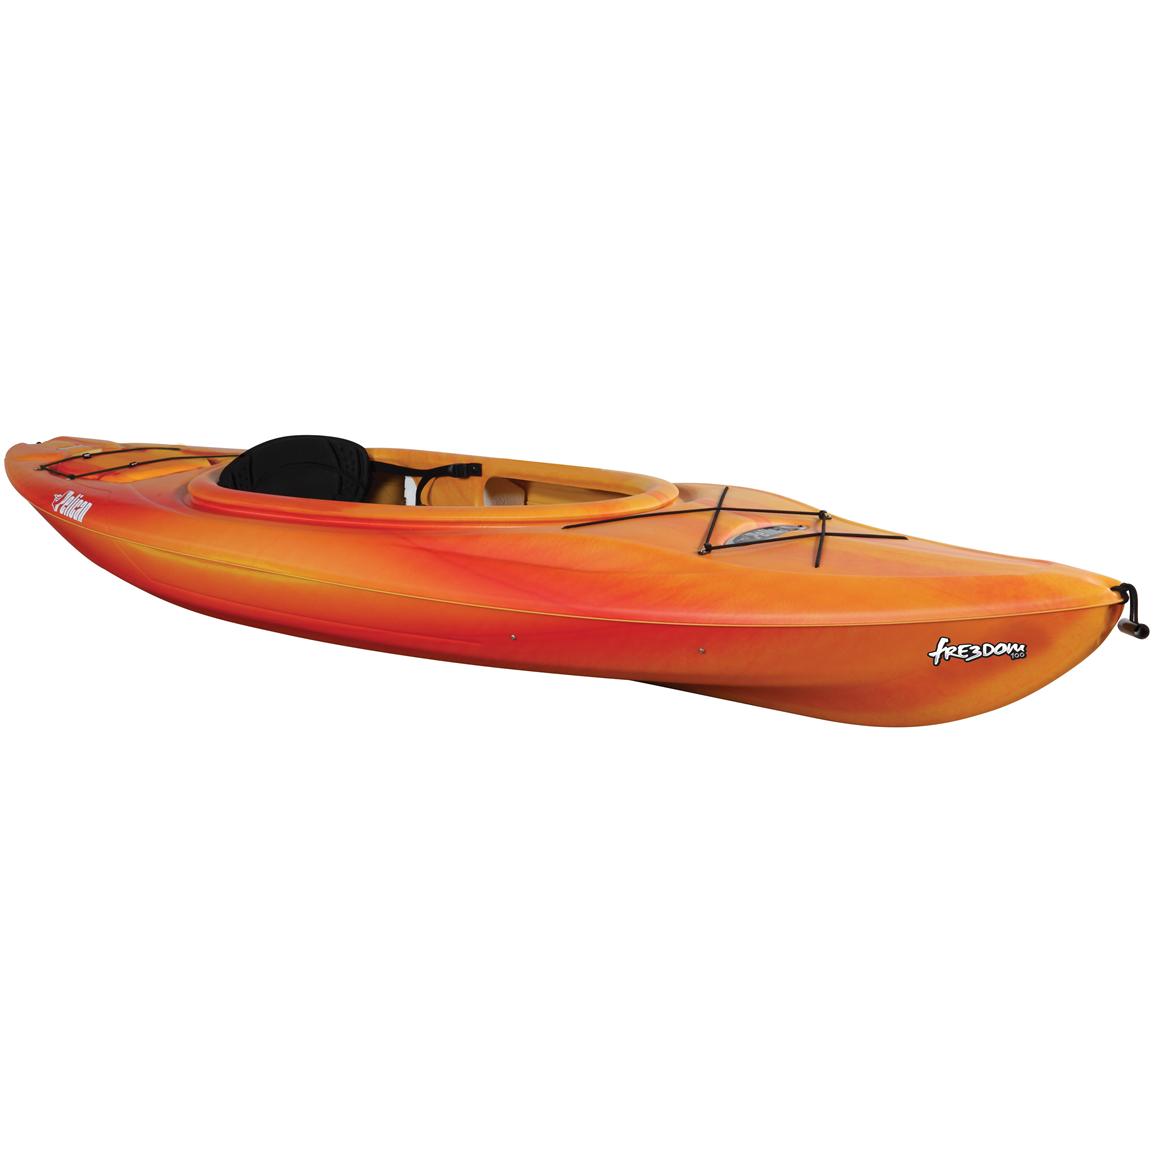 Pelican™ Freedom 100 Kayak, Yellow / Red - 206245, Canoes & Kayaks at Sportsman's Guide1154 x 1154